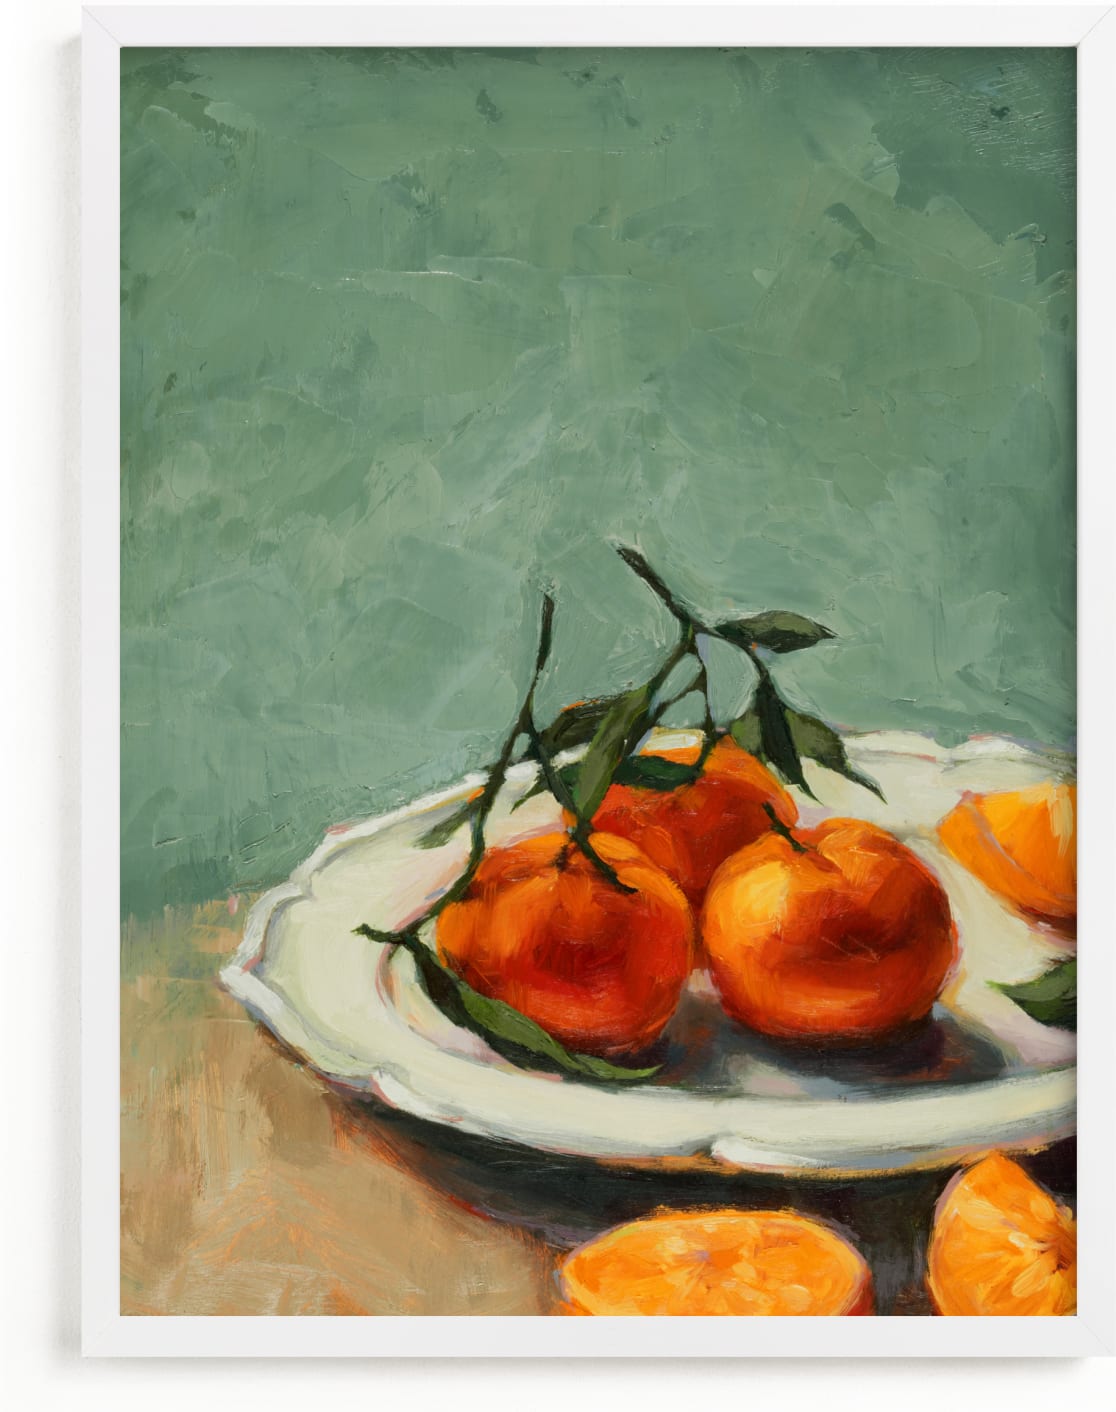 This is a orange art by Wendy Keller called Clementine.